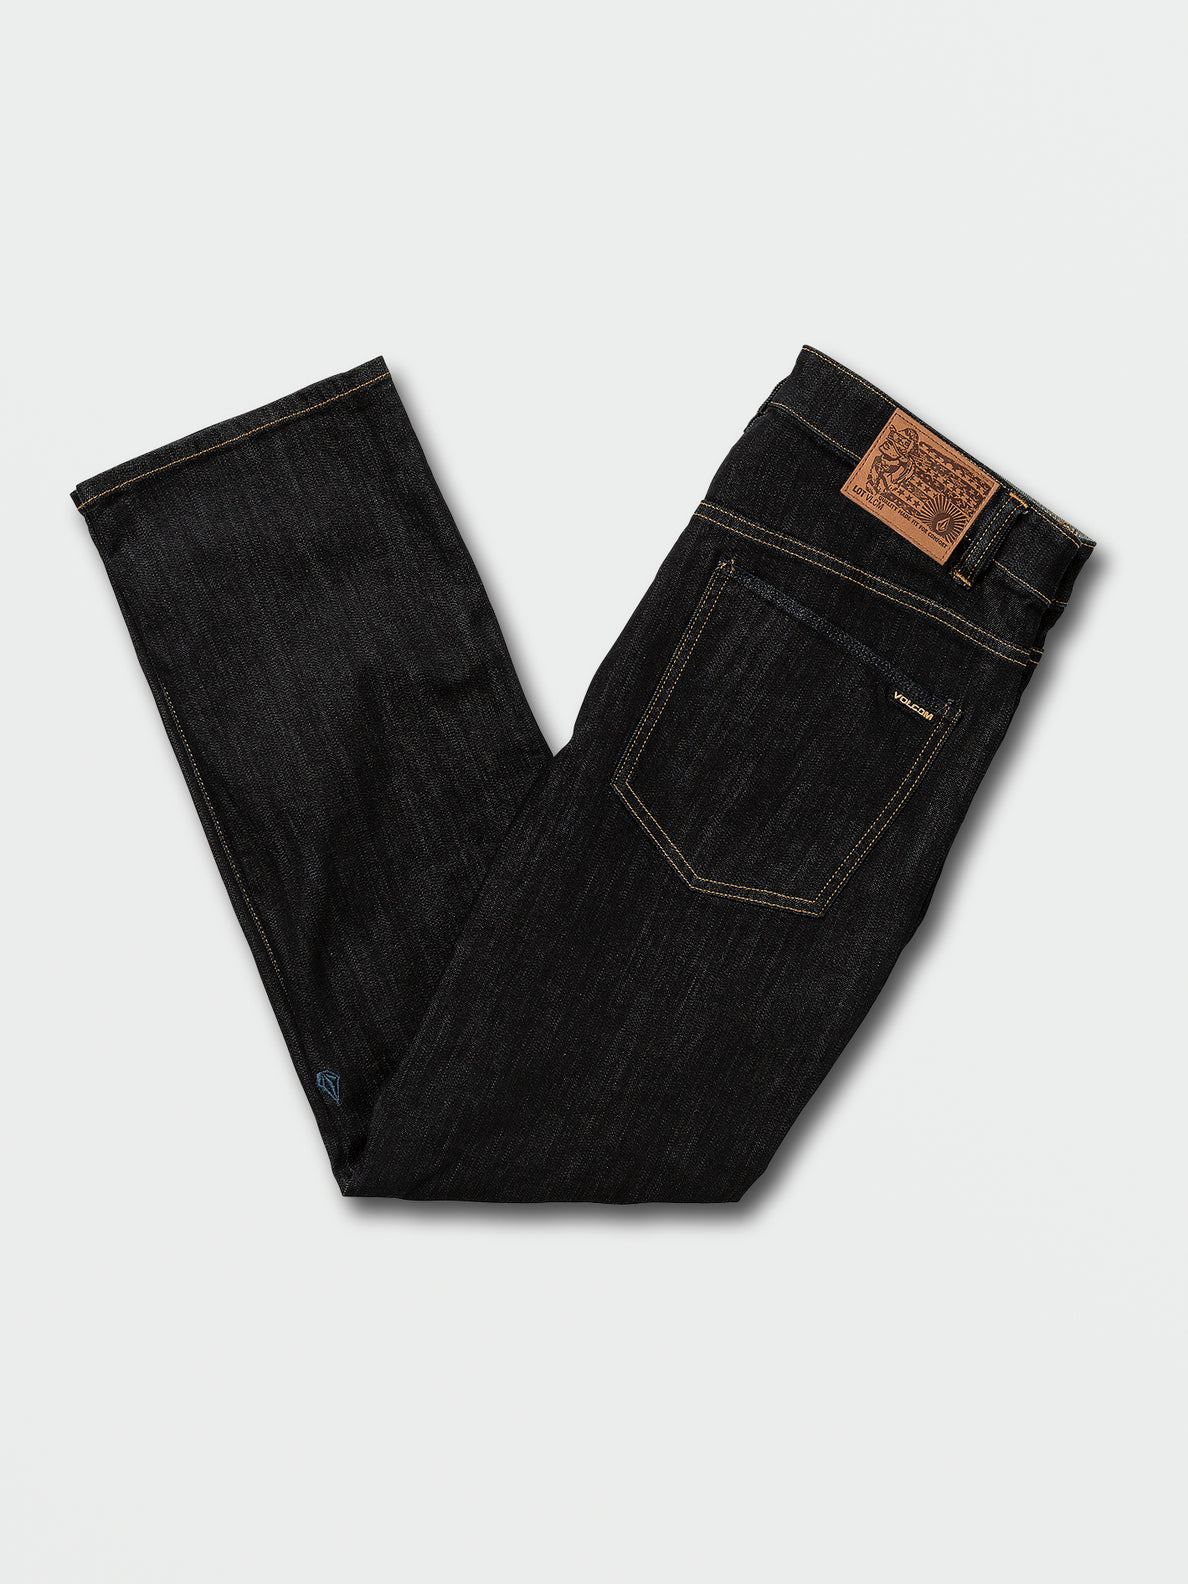 Solver Modern Fit Jeans - Rinse (A1931503_RNS) [B]